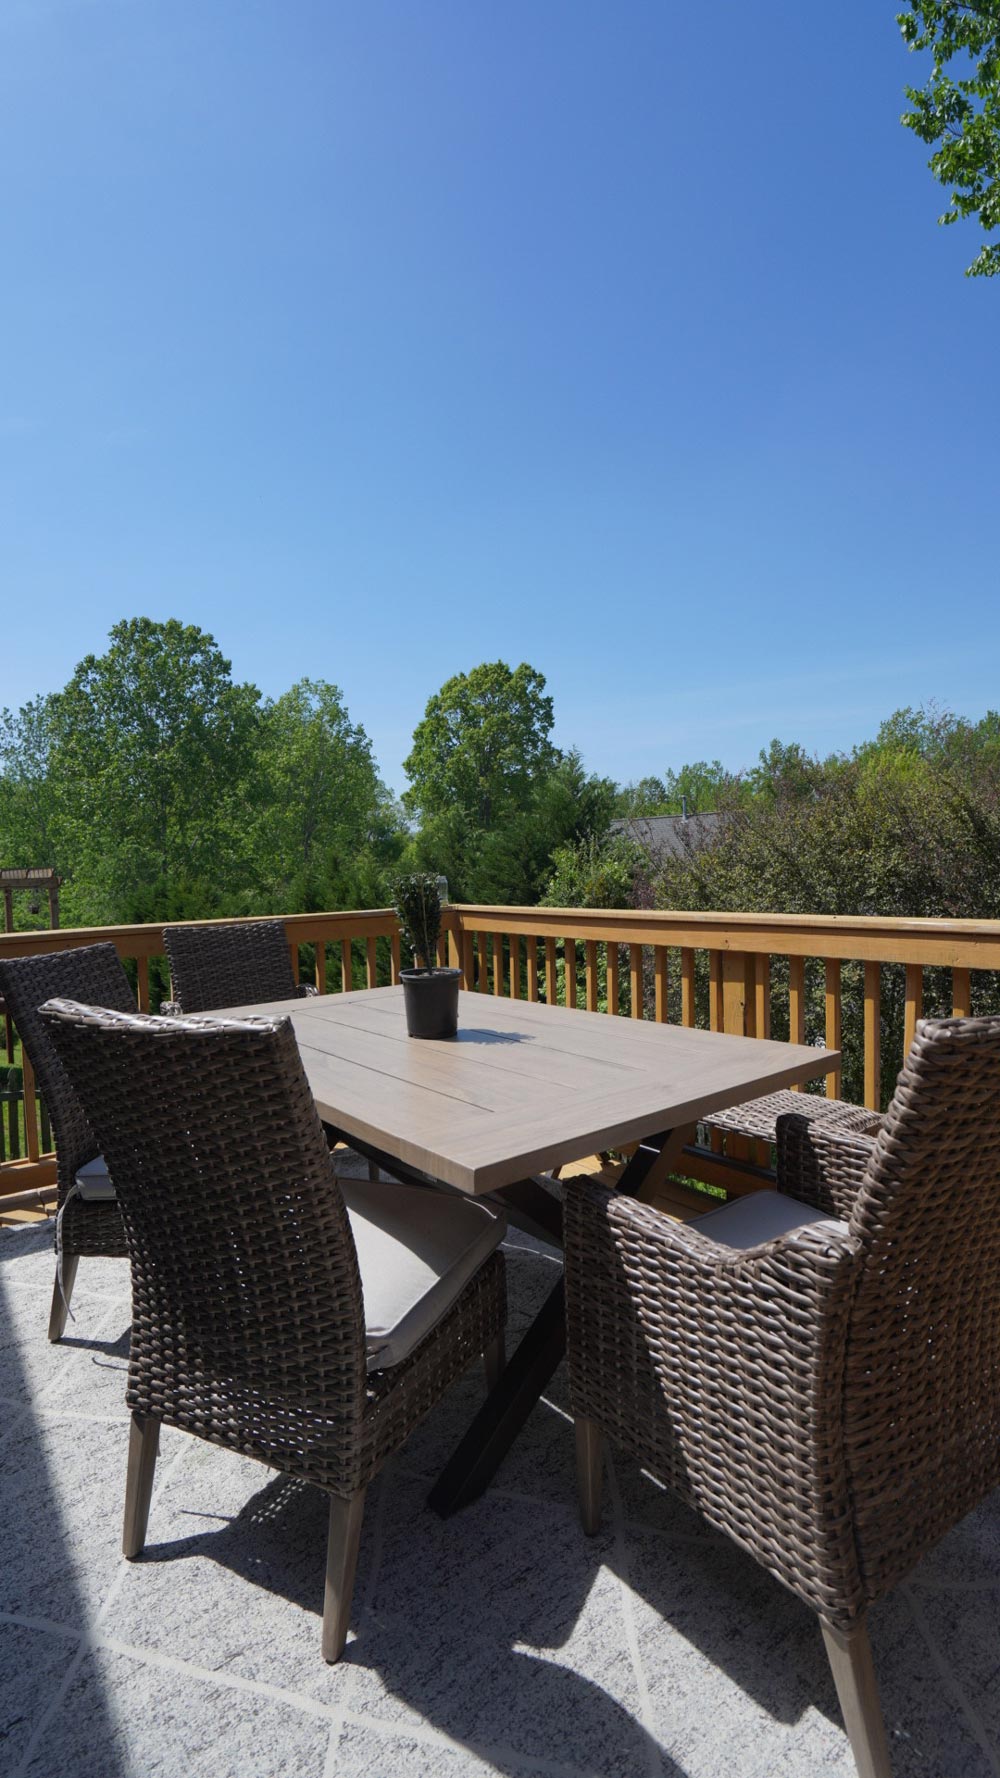 Right-angled view of a patio set, blue sky, and trees in the background. 